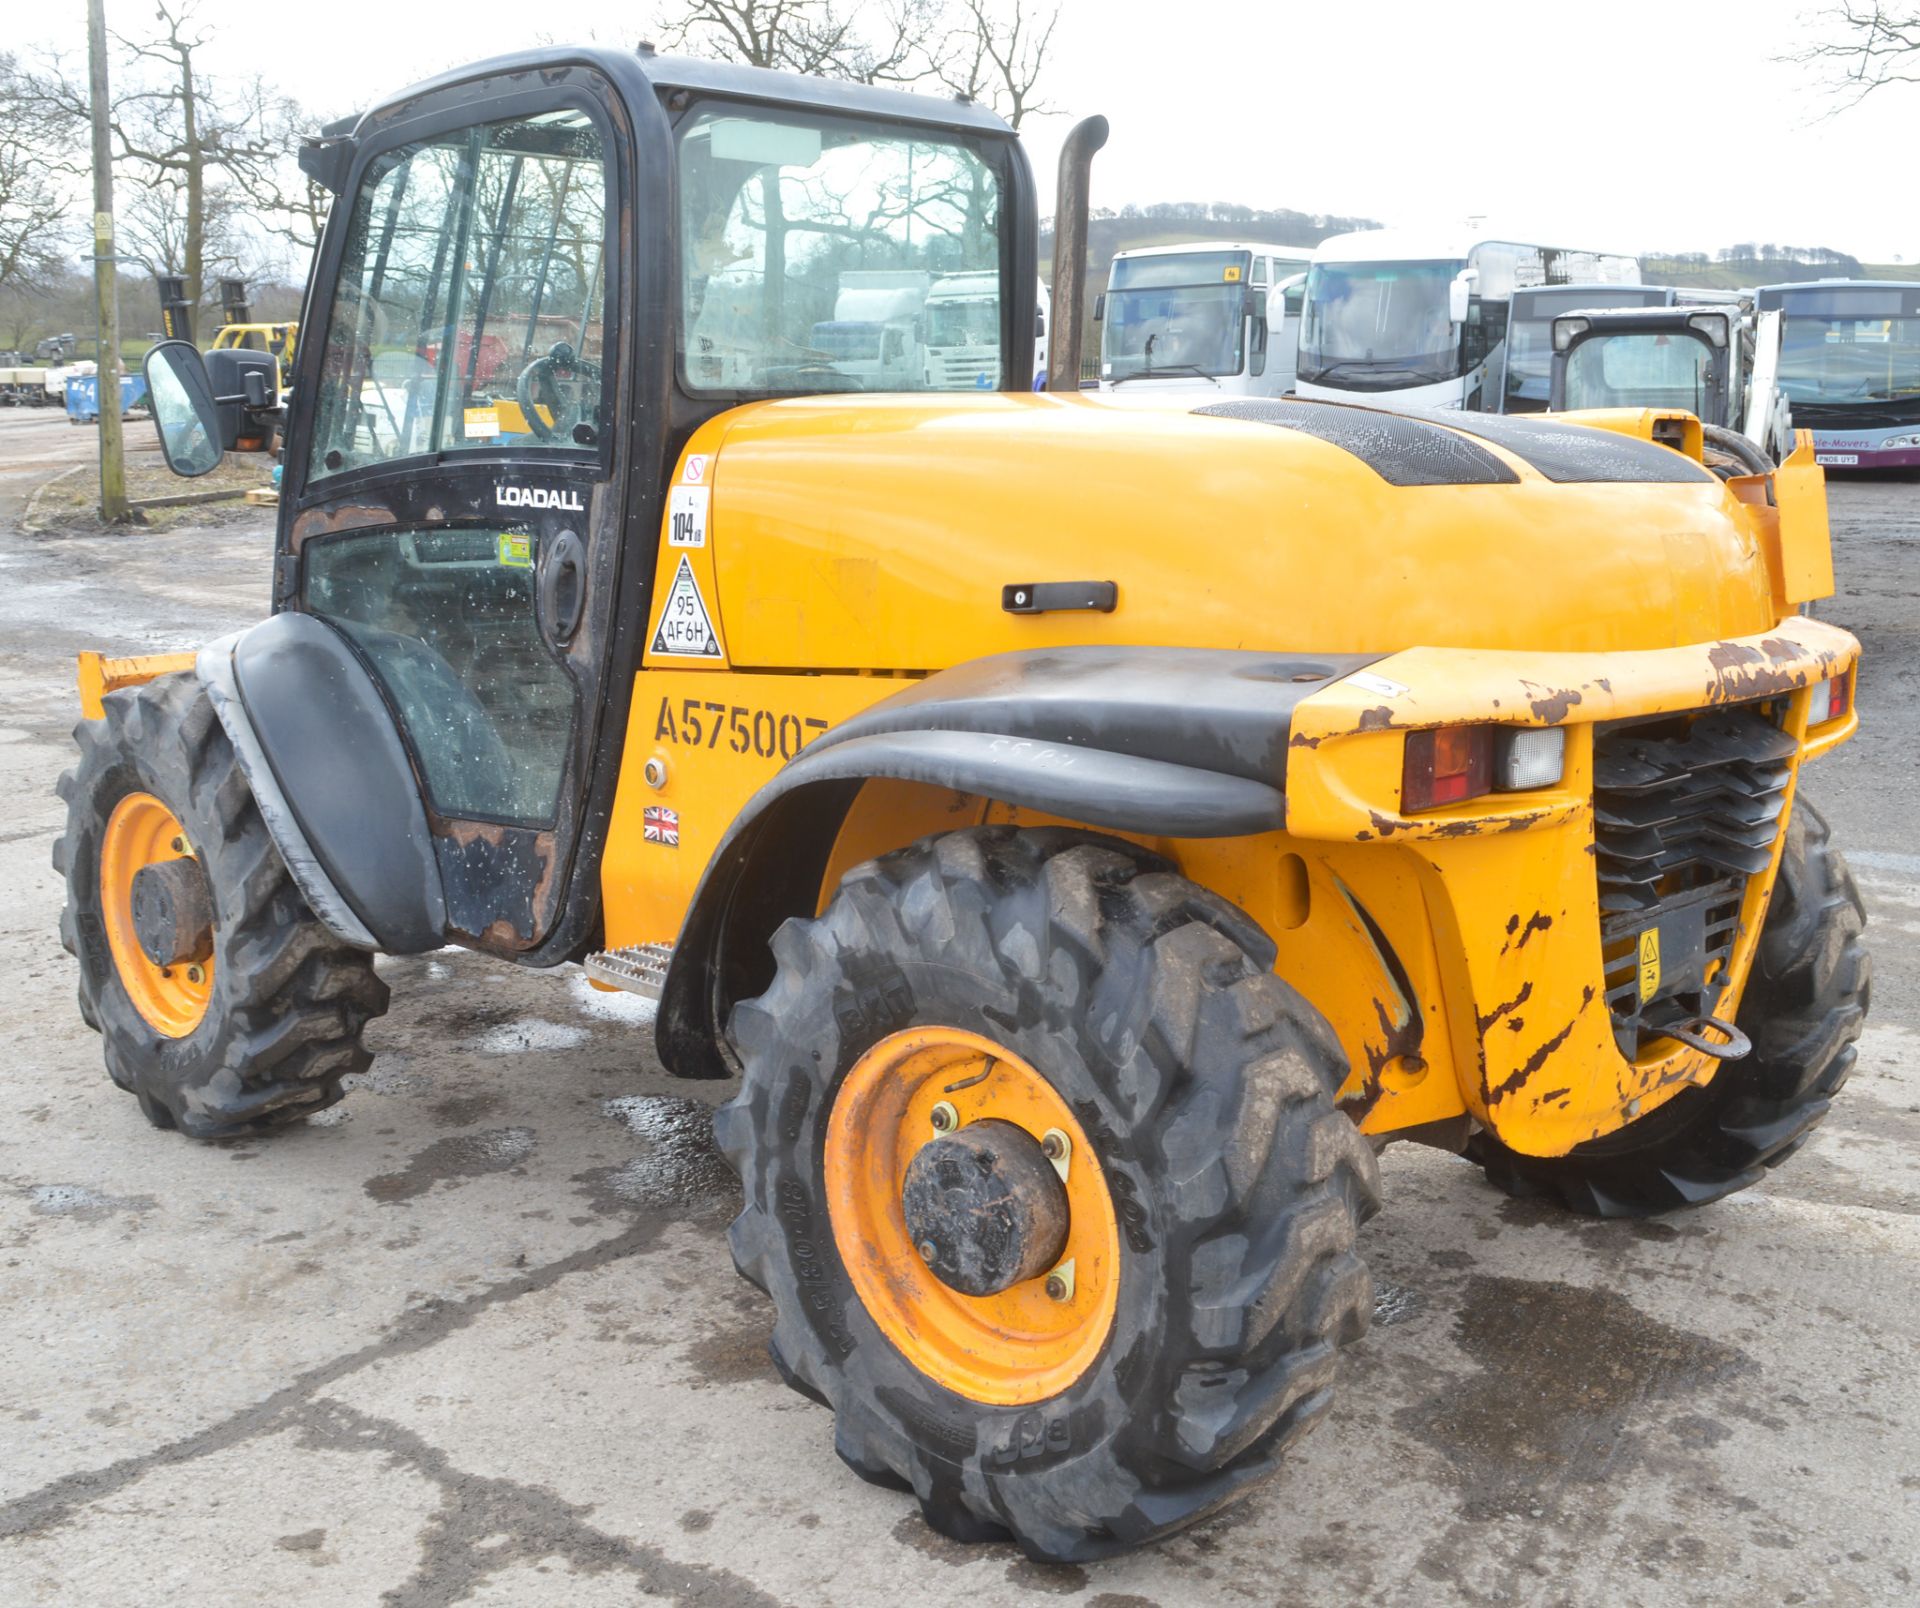 JCB 524-50 5 metre telescopic handler  Year: 2012 S/N: 01419126 Recorded hours: 2178 A575007 - Image 2 of 13